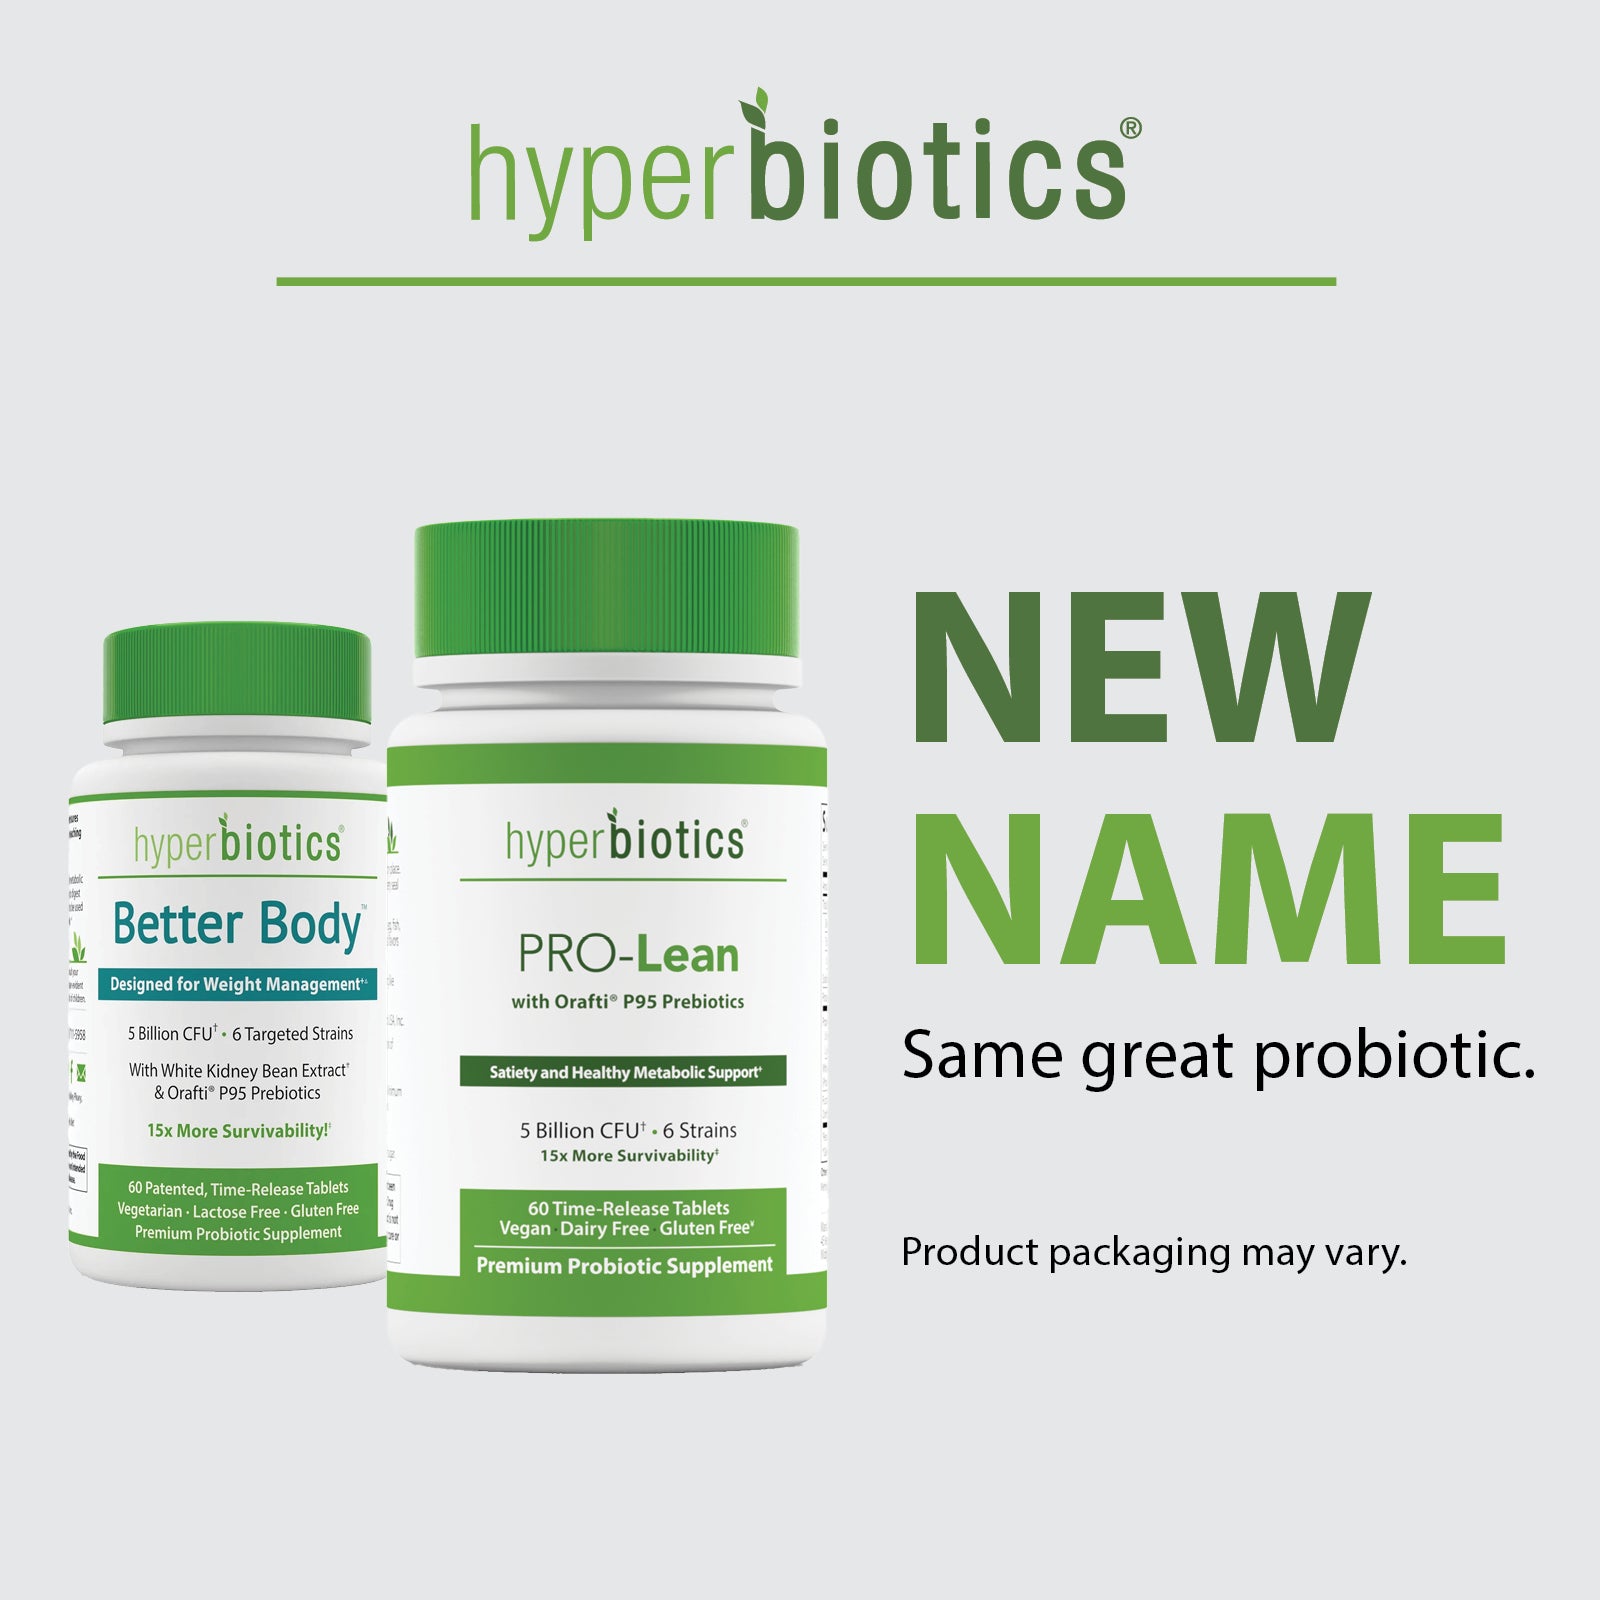 Hyperbiotics PRO-Lean: Satiety and Healthy Metabolic Support Probiotic. New Name, Same Great Product.